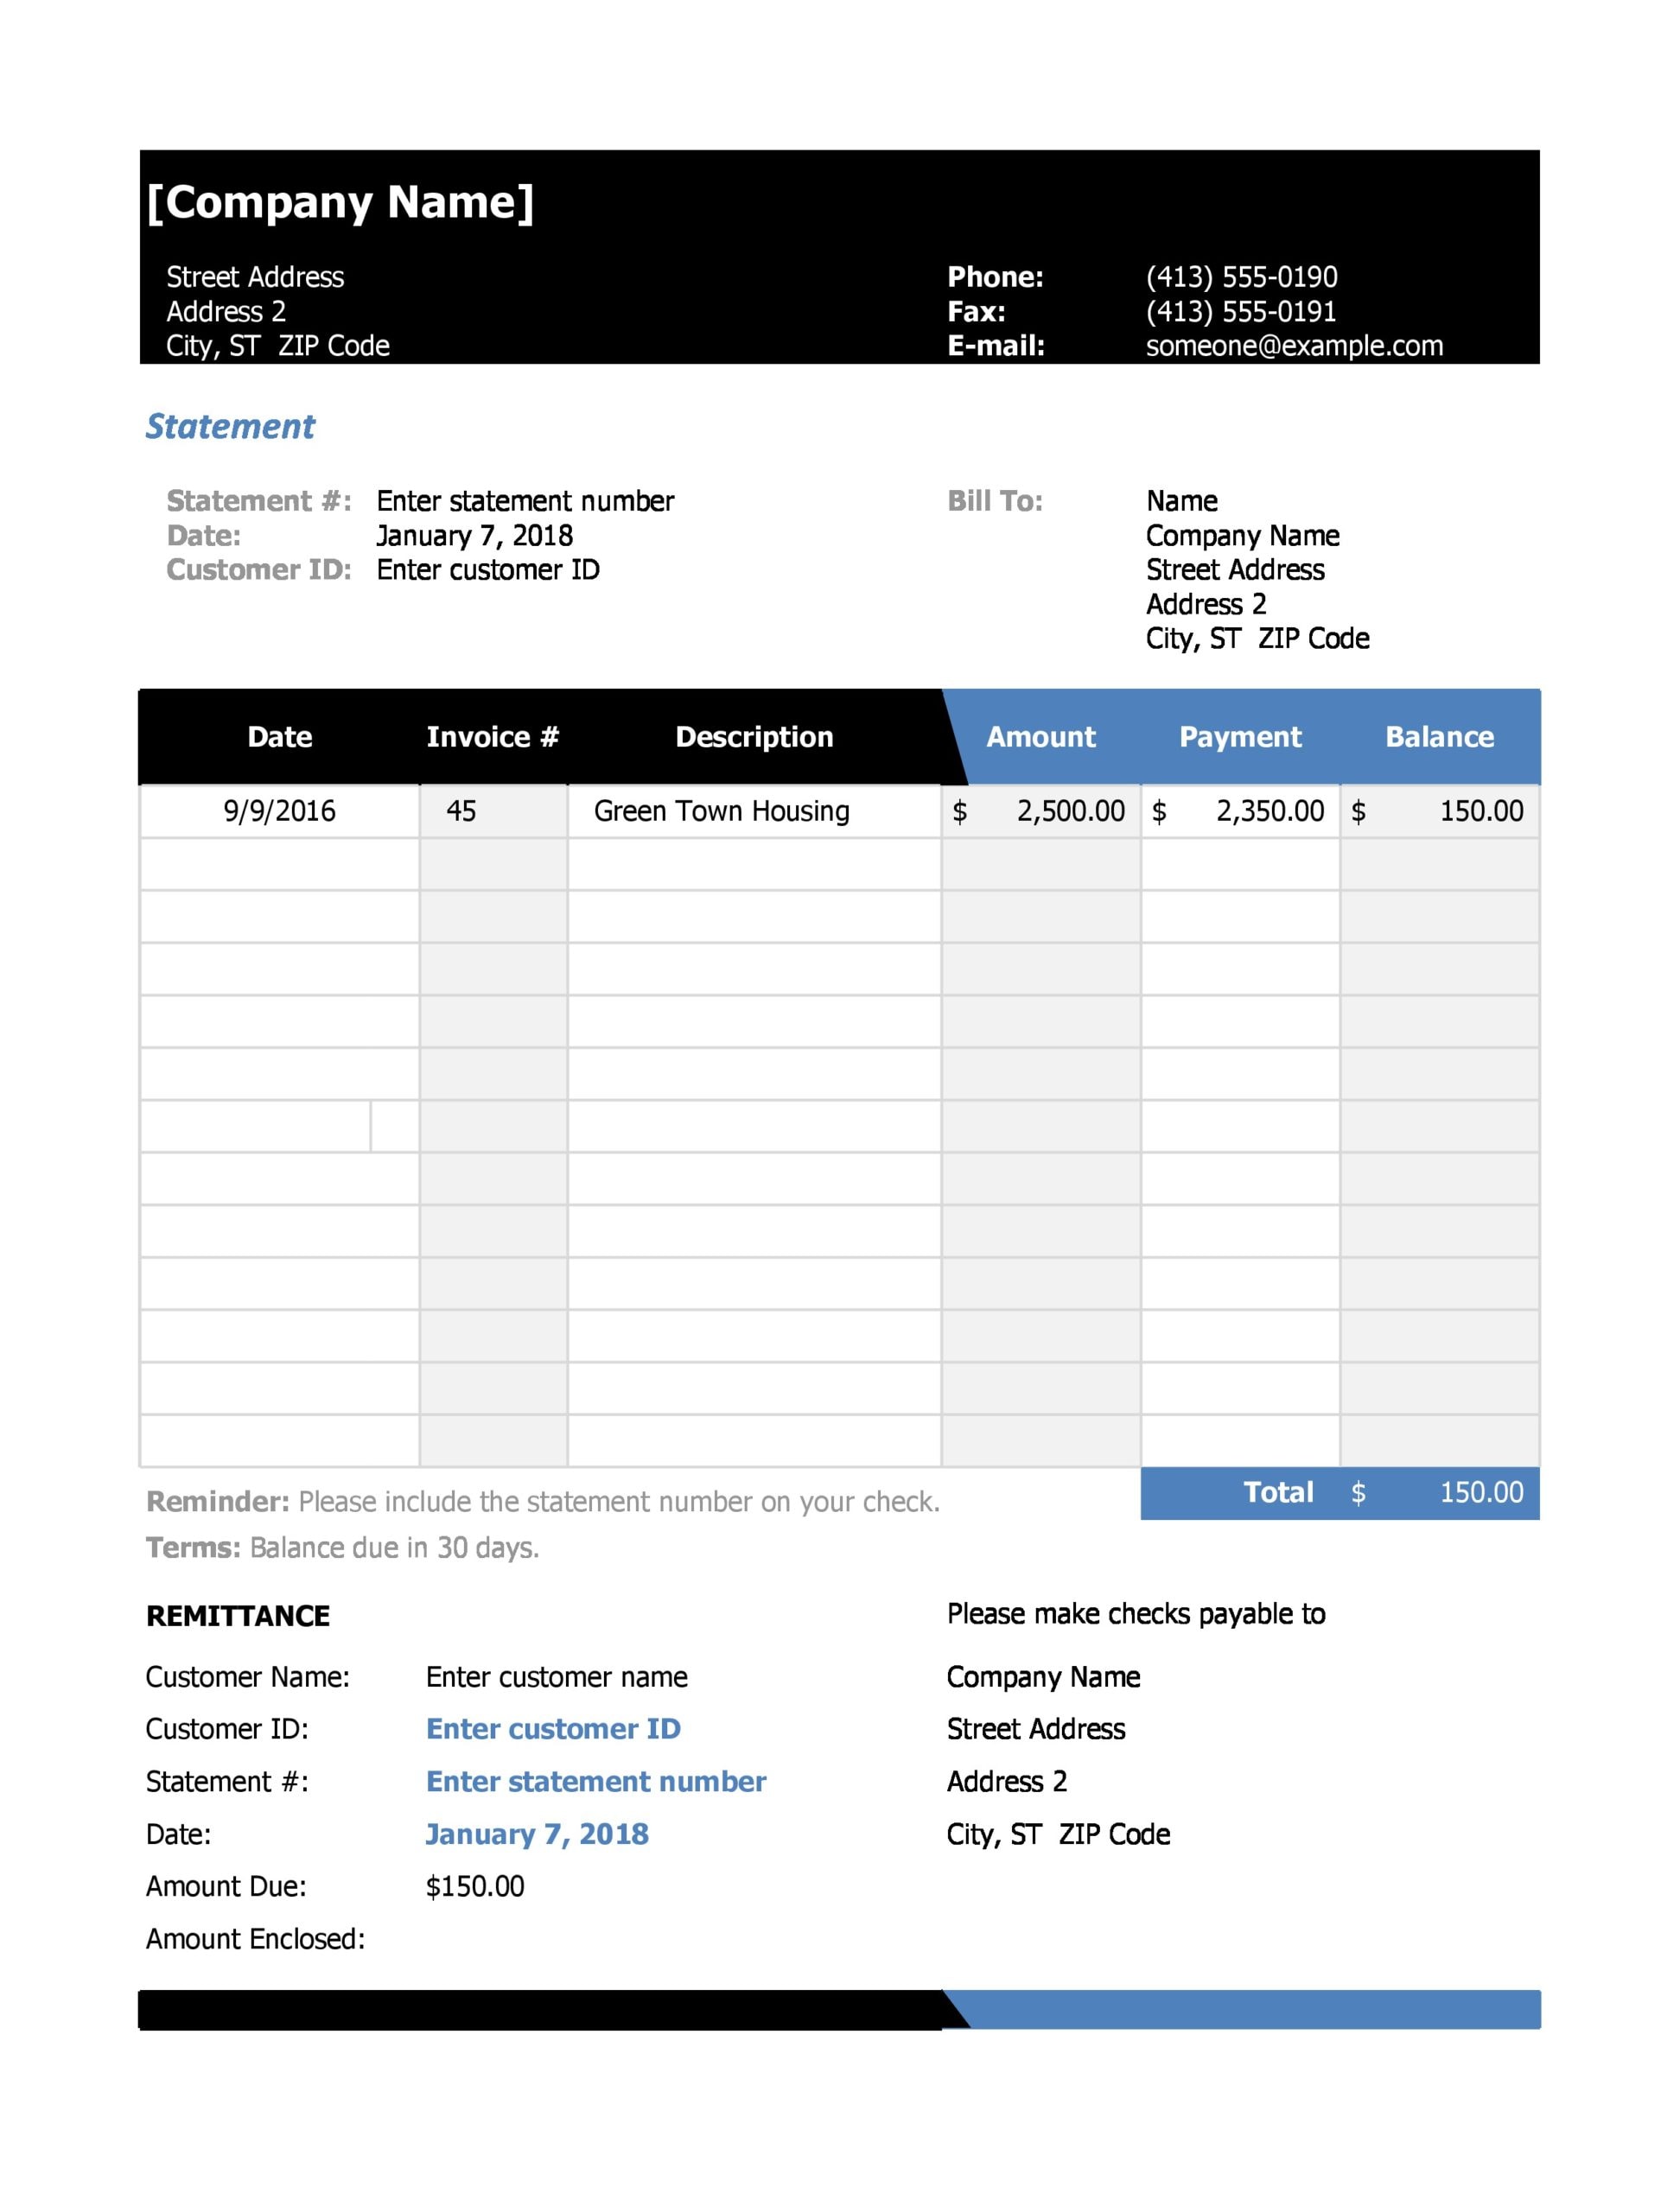 excel-bank-statement-template